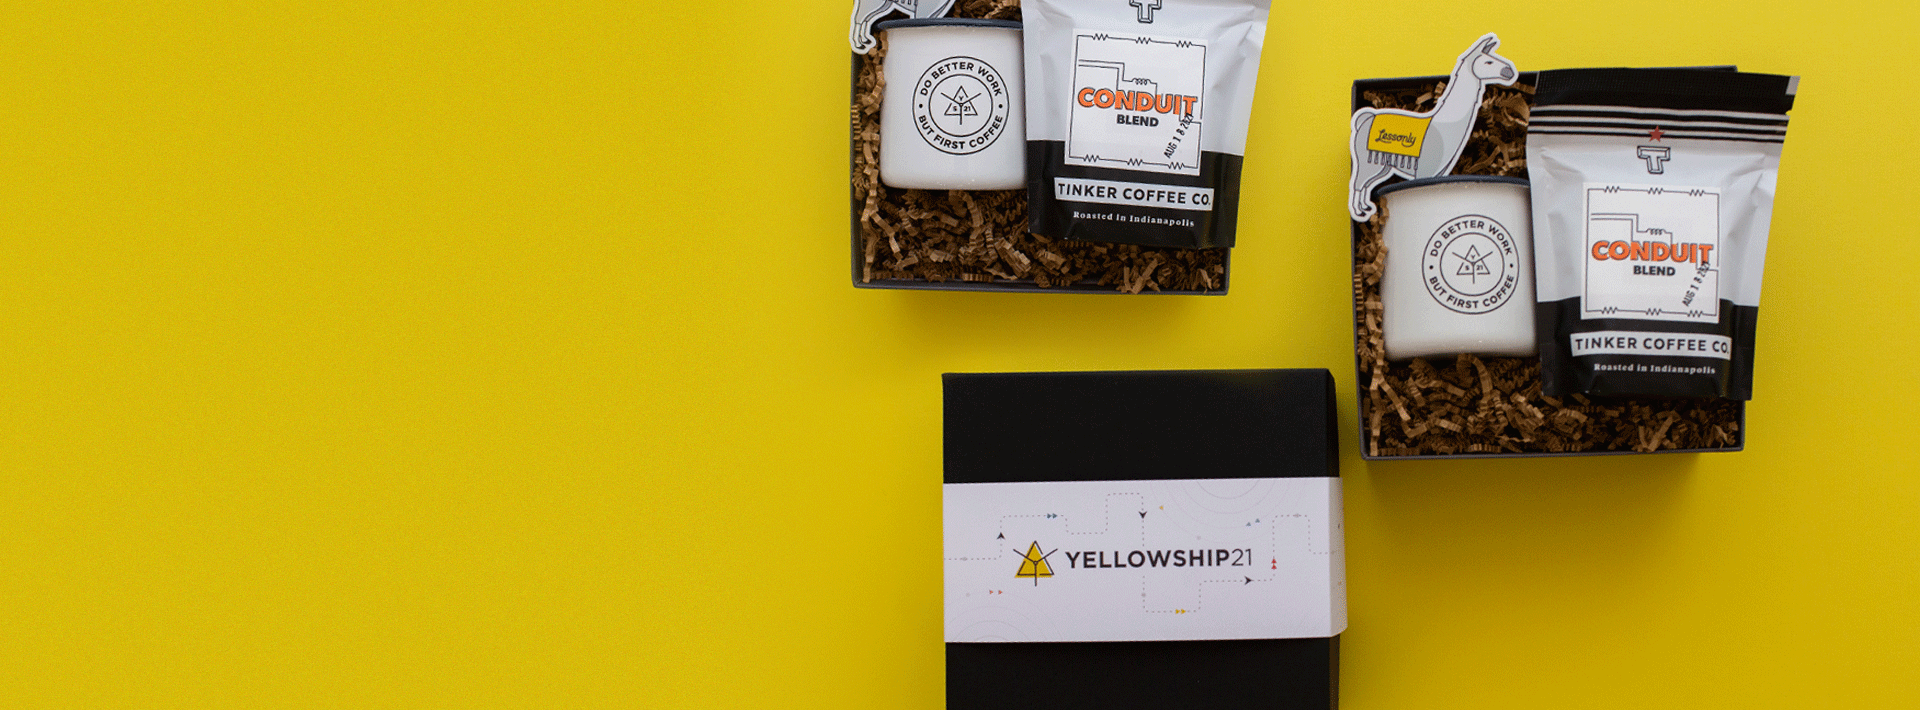 lessonly coffee and llama gift boxes with branded packaging